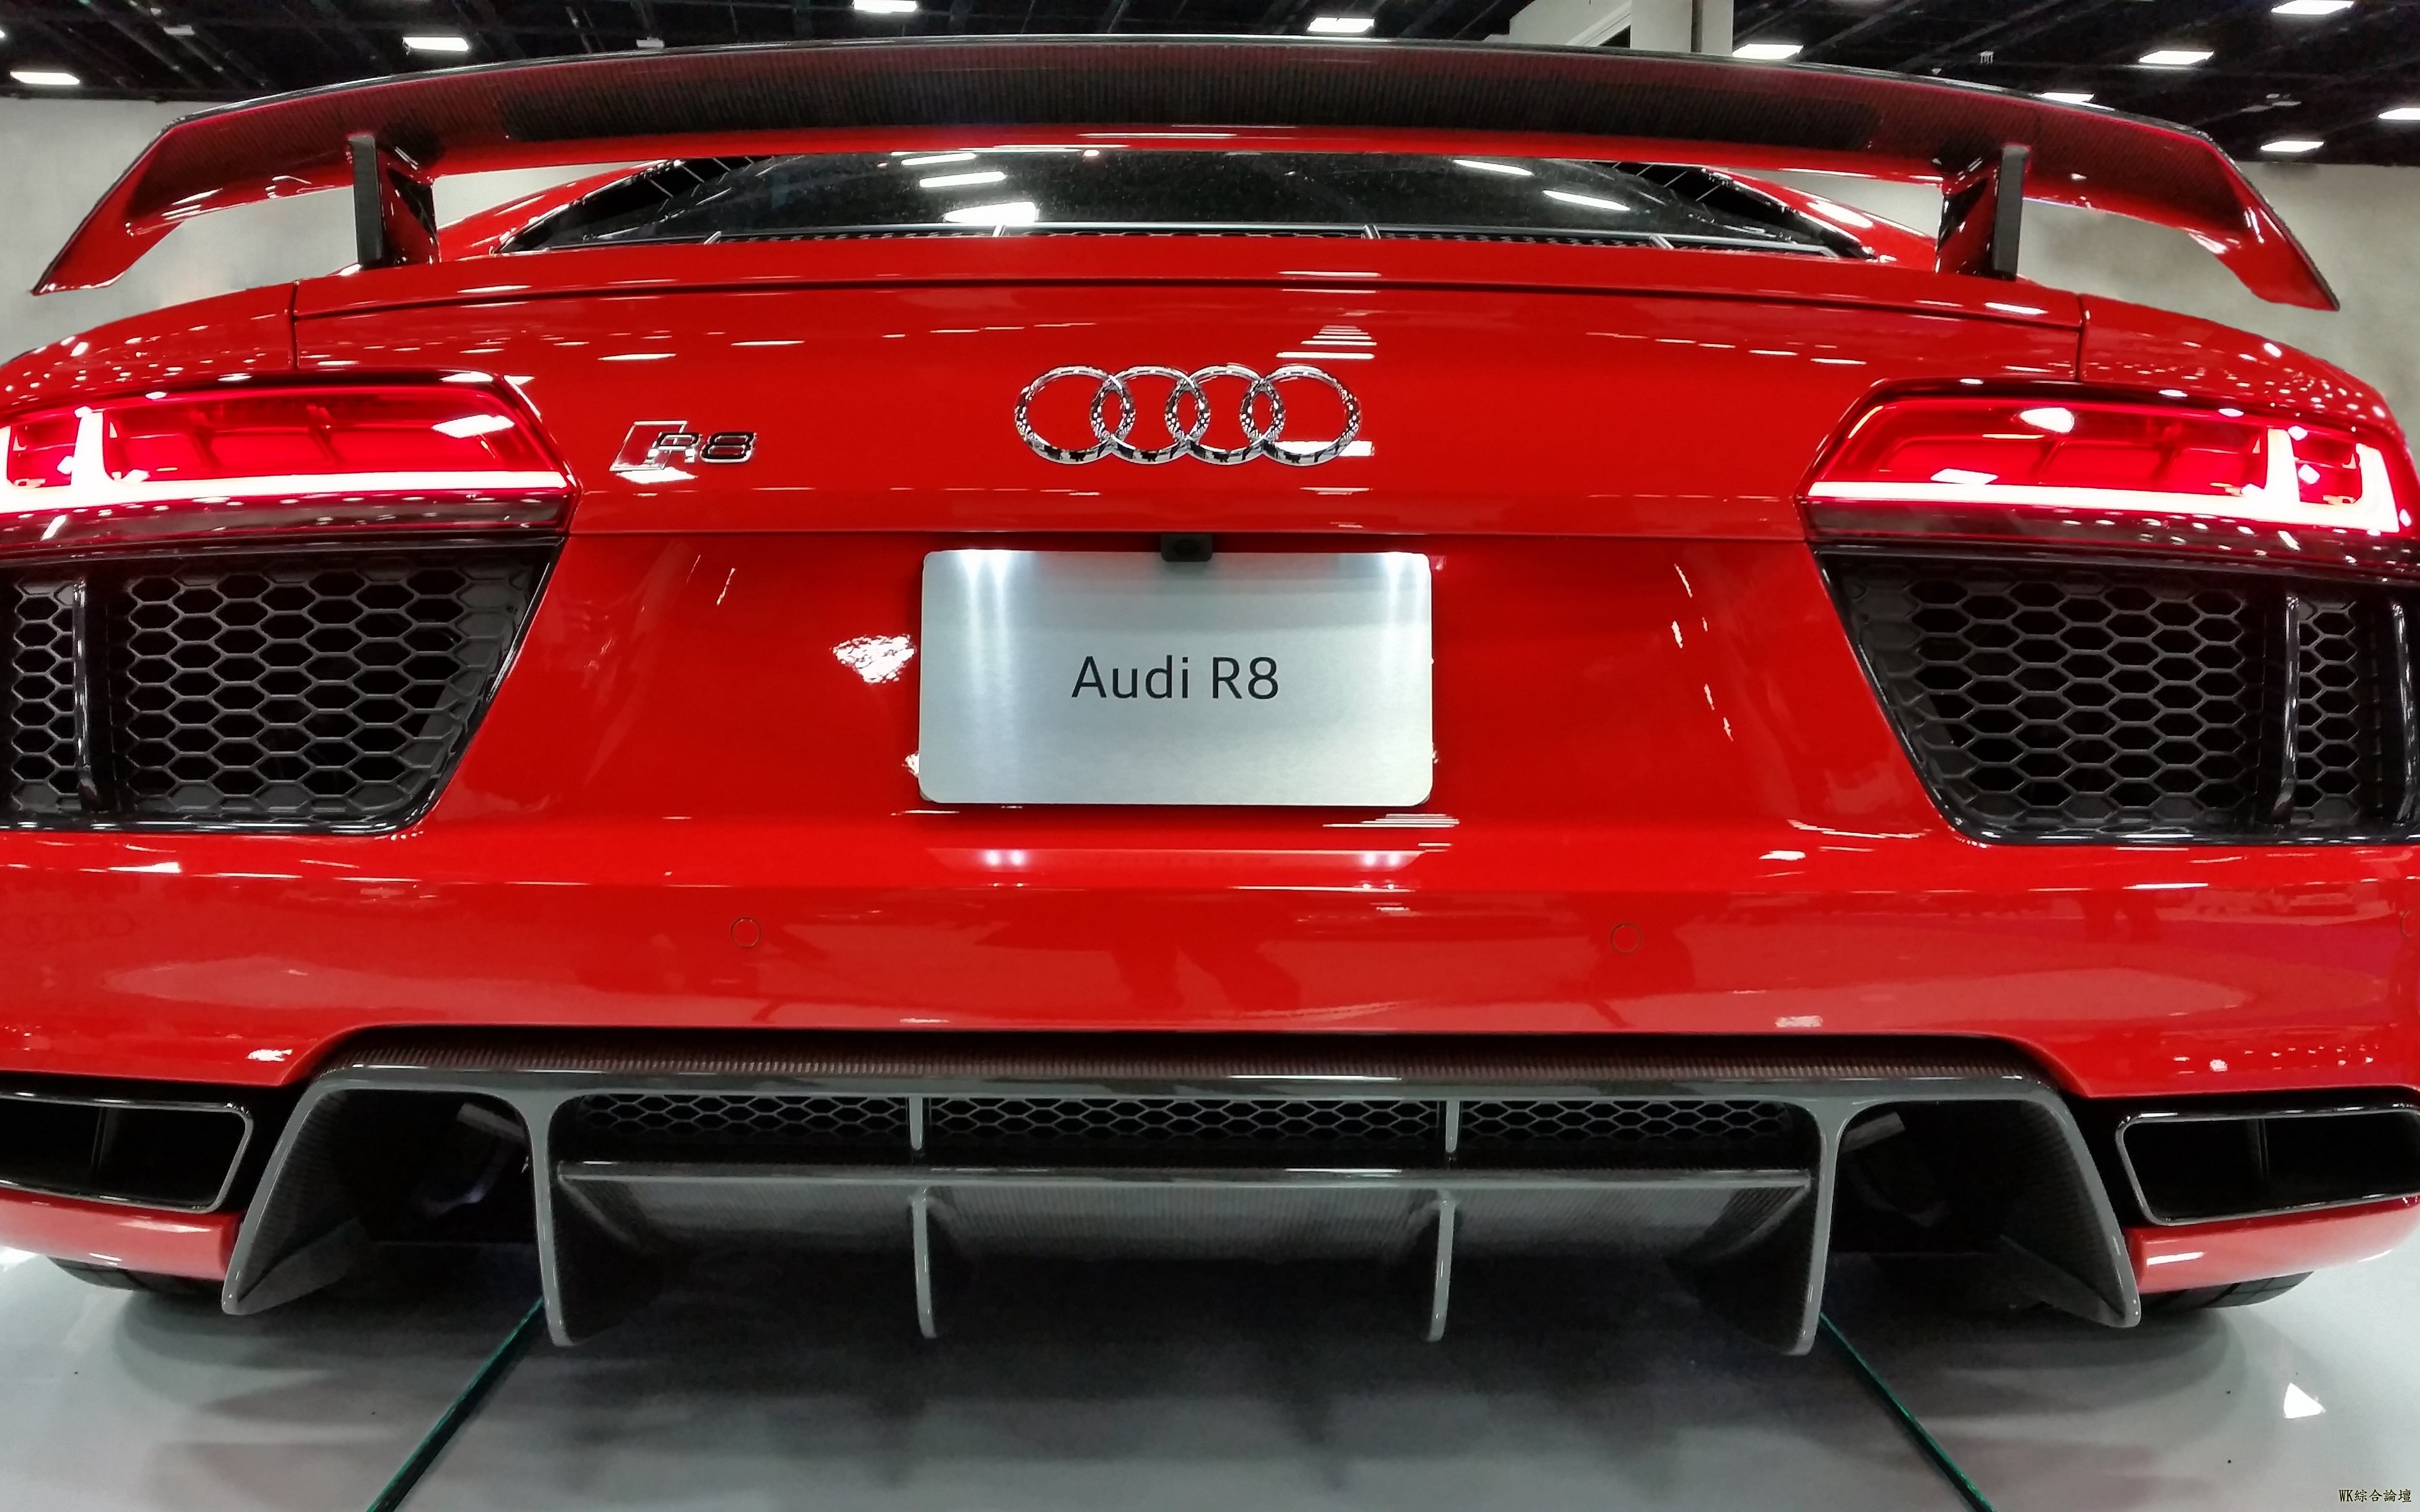 audi_r8_audi_red_front_view_110654_3840x2400.jpg